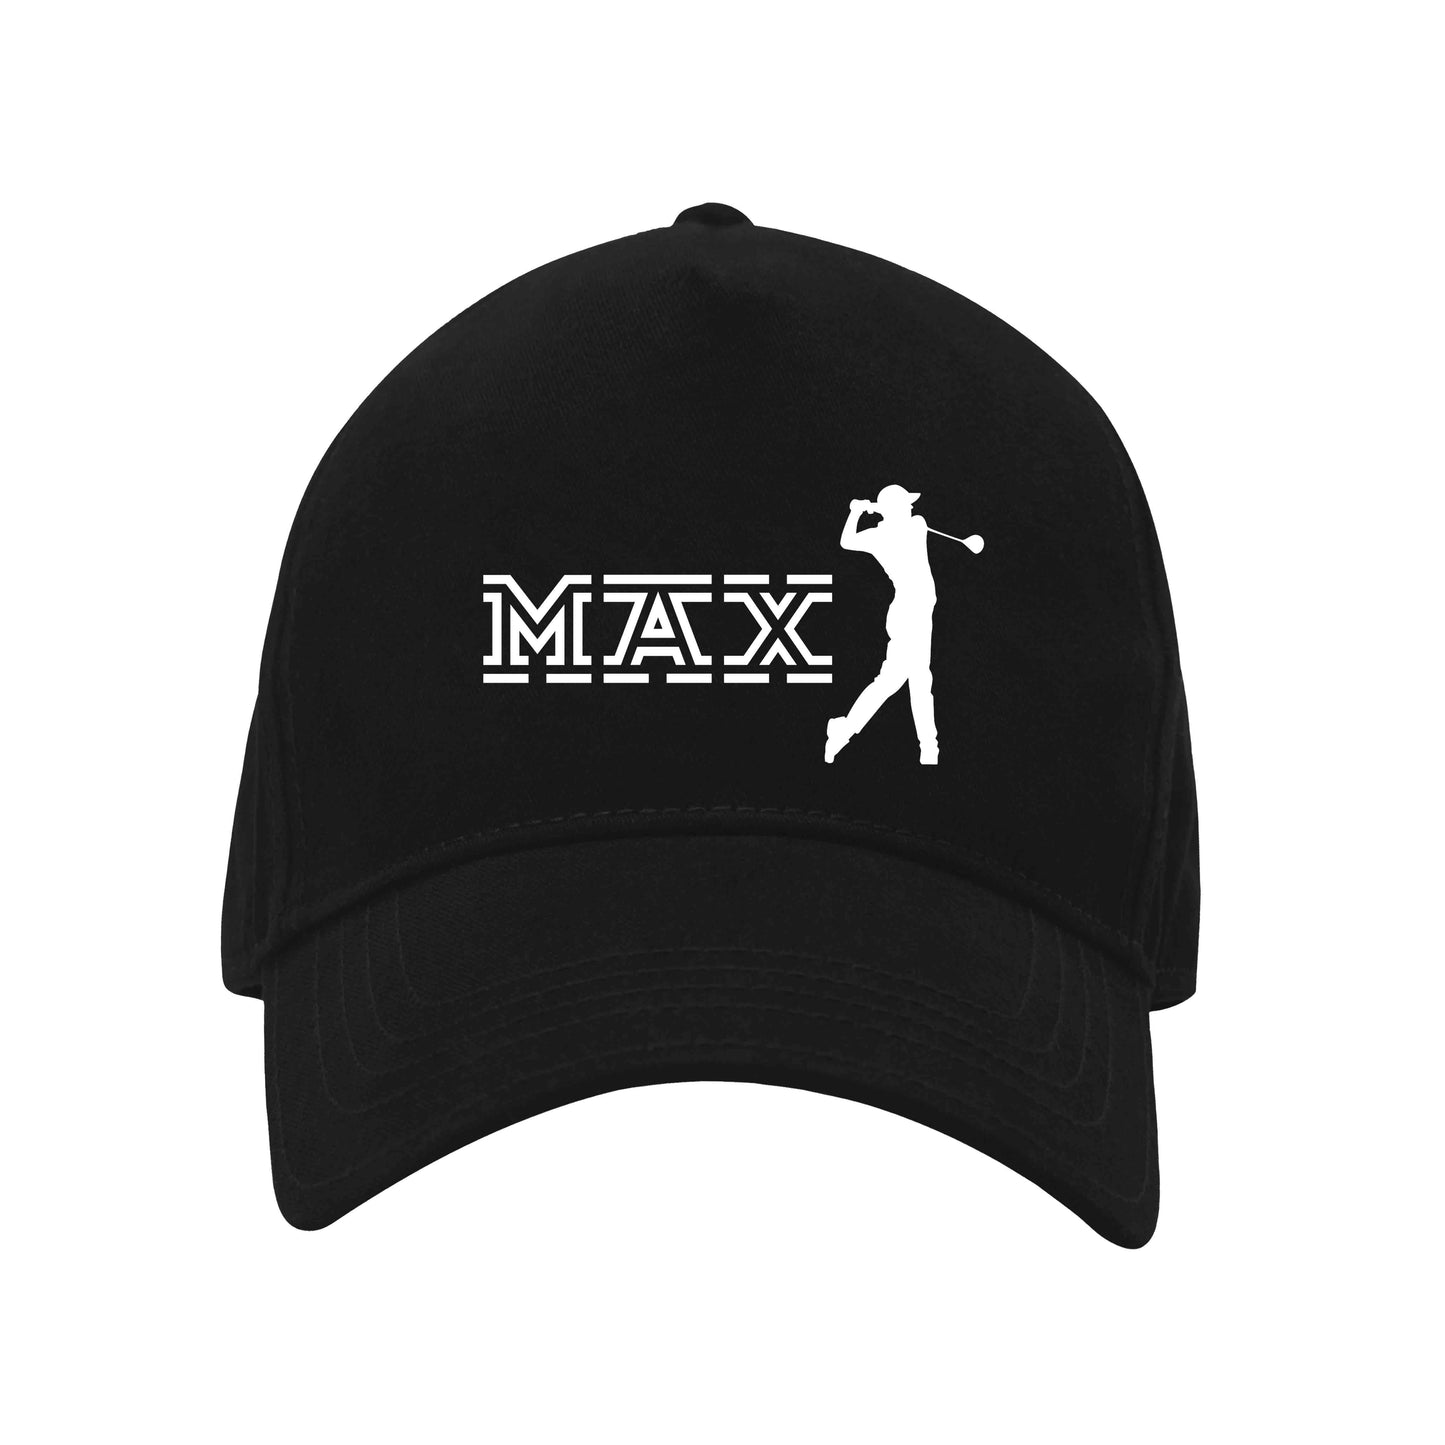 Nutcase Black Color Cap - Personalized with Name Black Caps - Golf